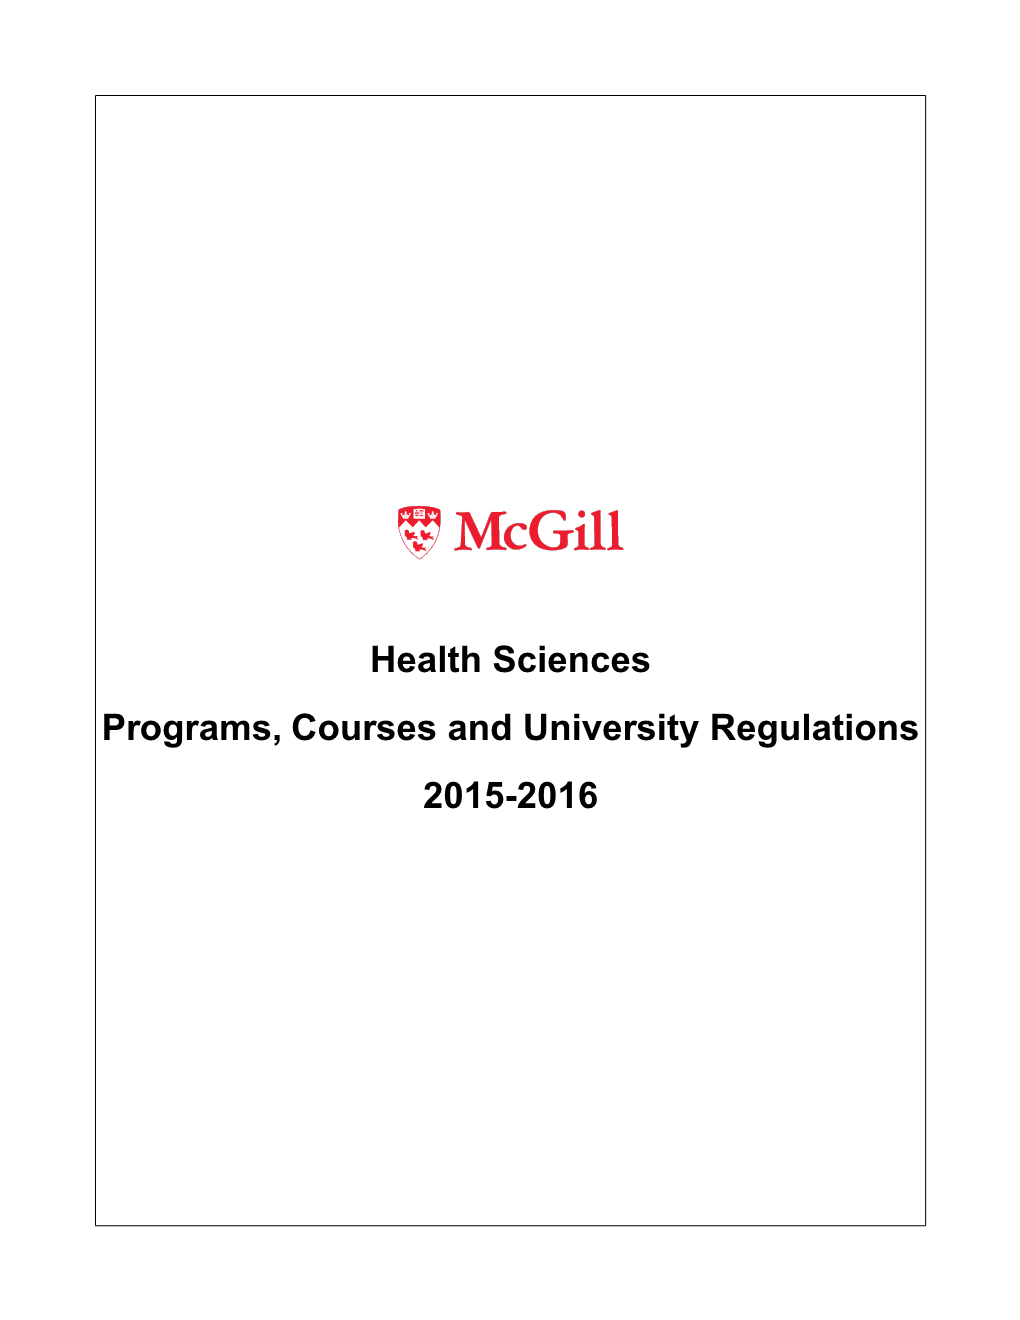 Health Sciences Programs, Courses and University Regulations 2015-2016